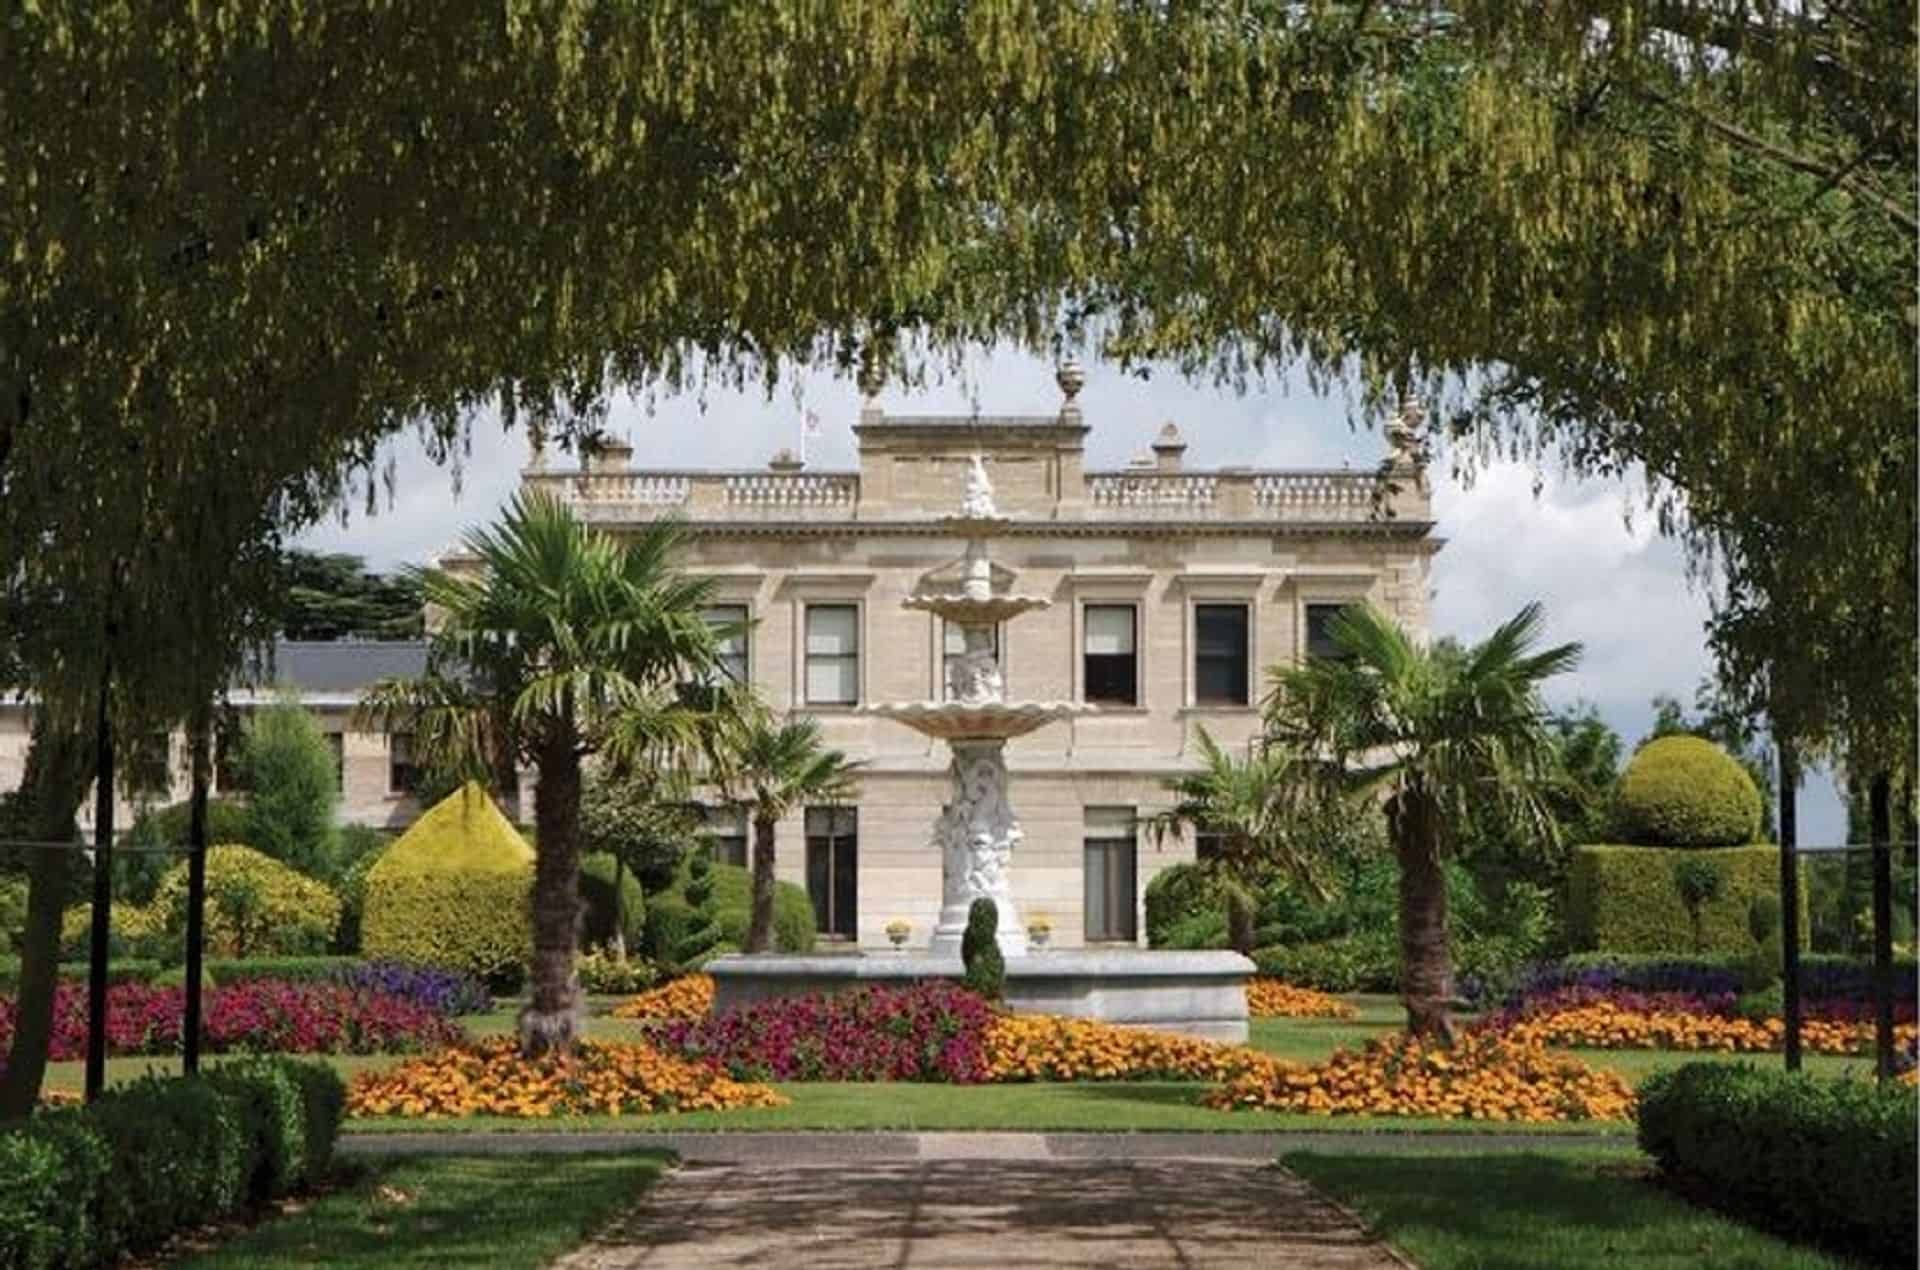 Brodsworth Hall and Gardens in UK